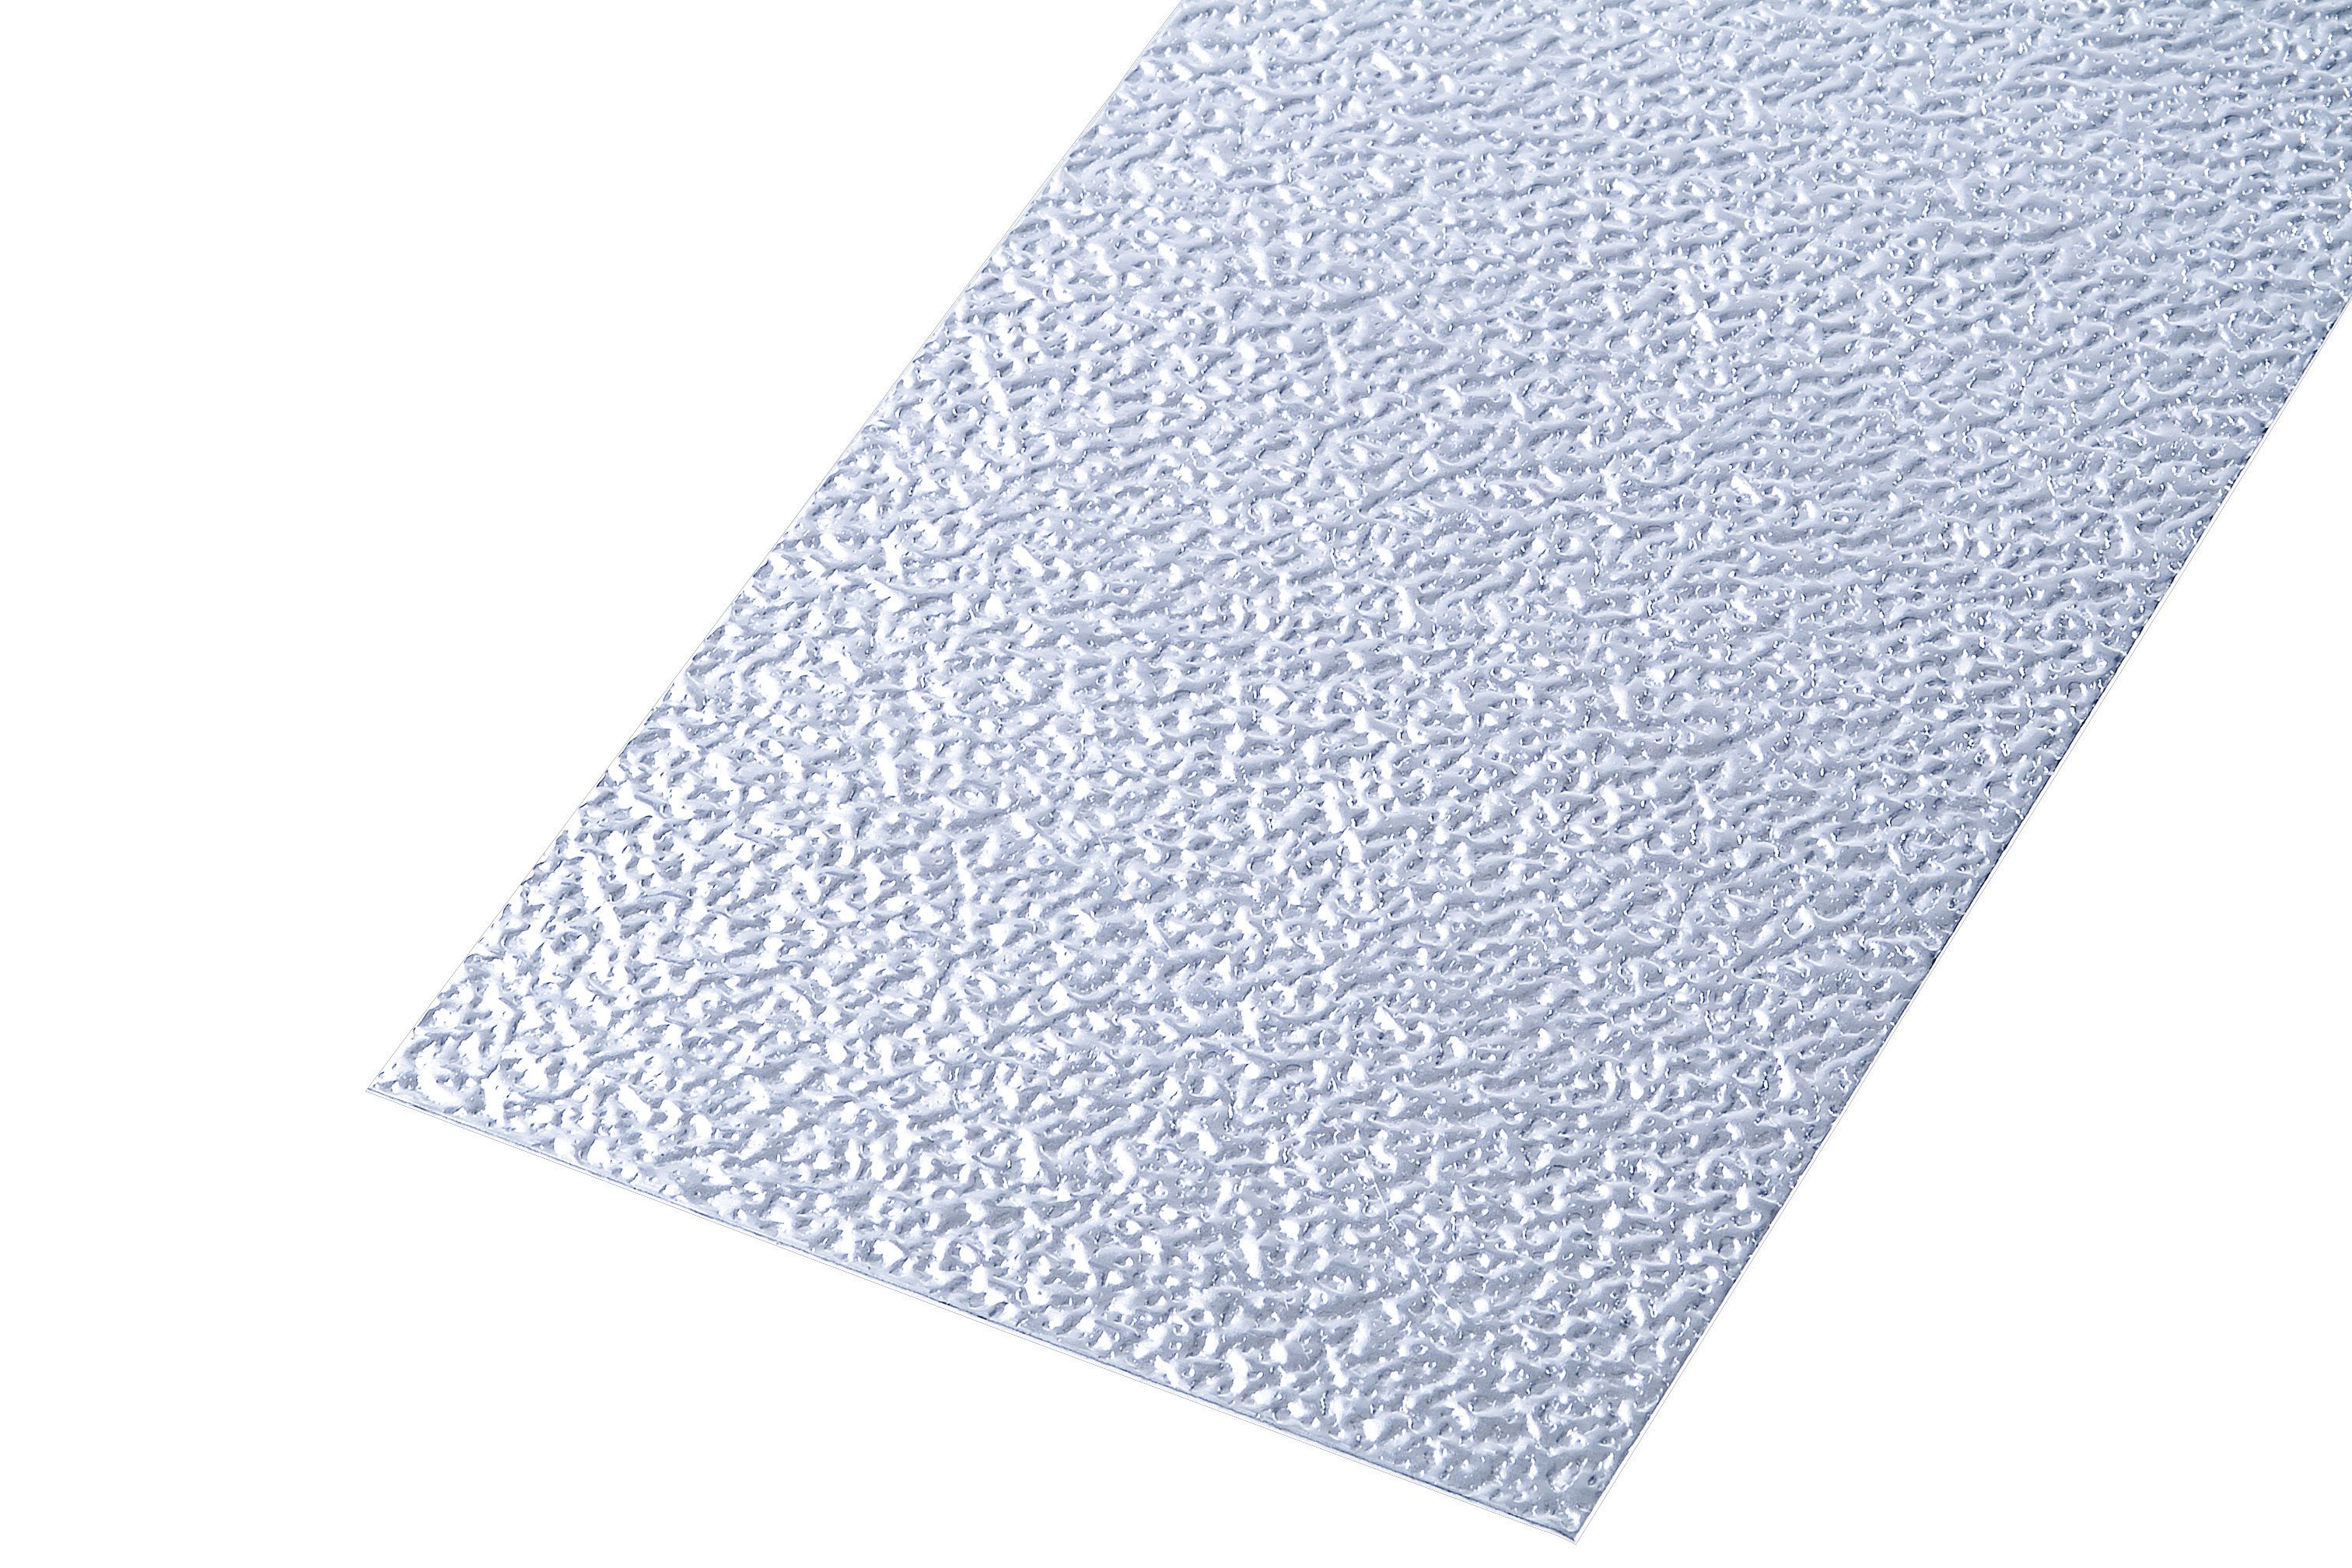 Rothley Uncoated Aluminium Roughcast Effect Metal Sheet - 250 x 500mm